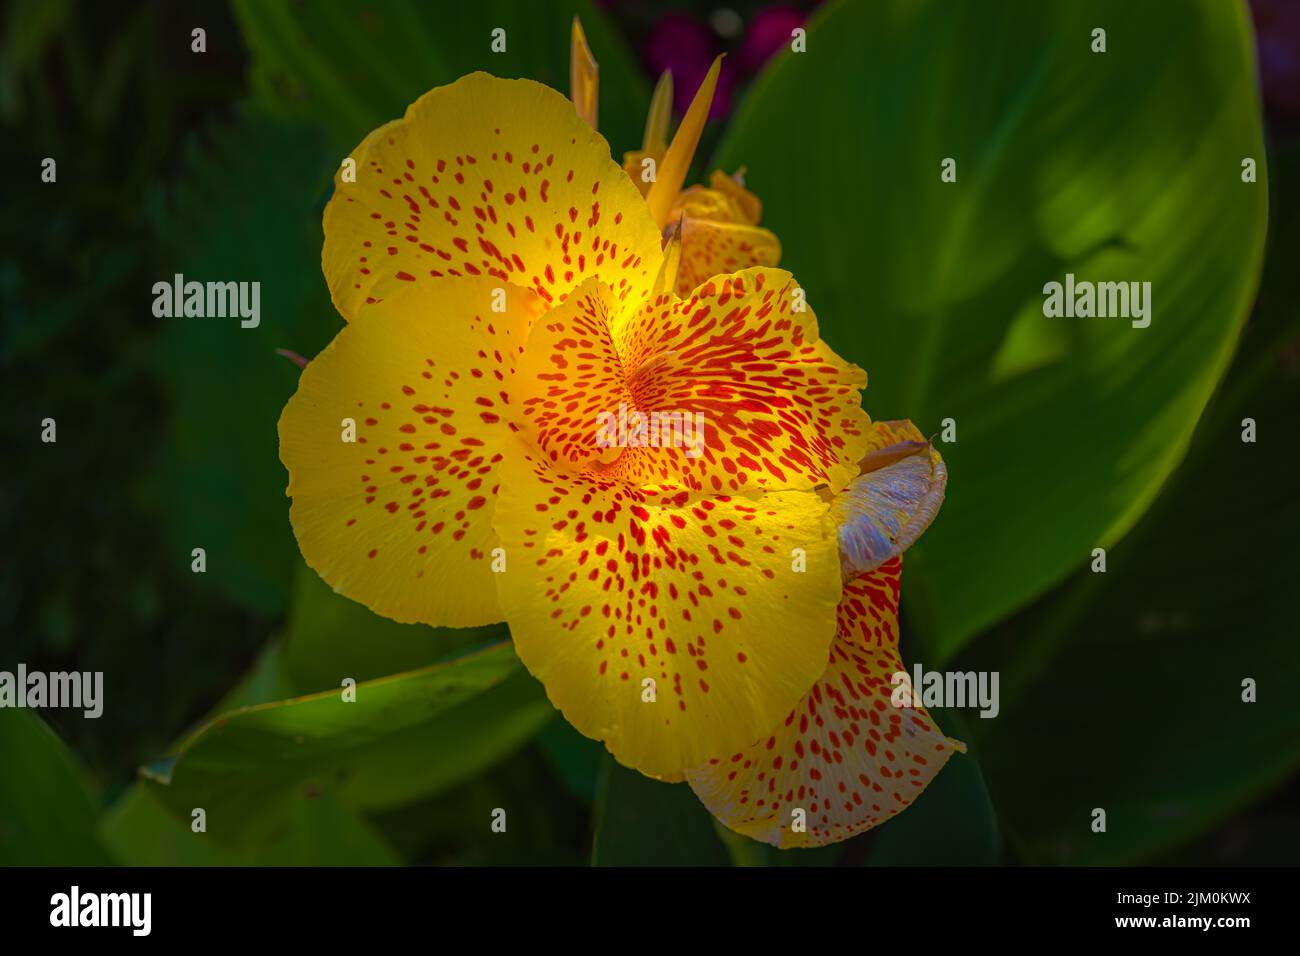 A YELLOW AND ORANGE ORCHID WITH BLURRED OUT BRIGHT GREEN LEAVES IN THE BACKGROUND Stock Photo